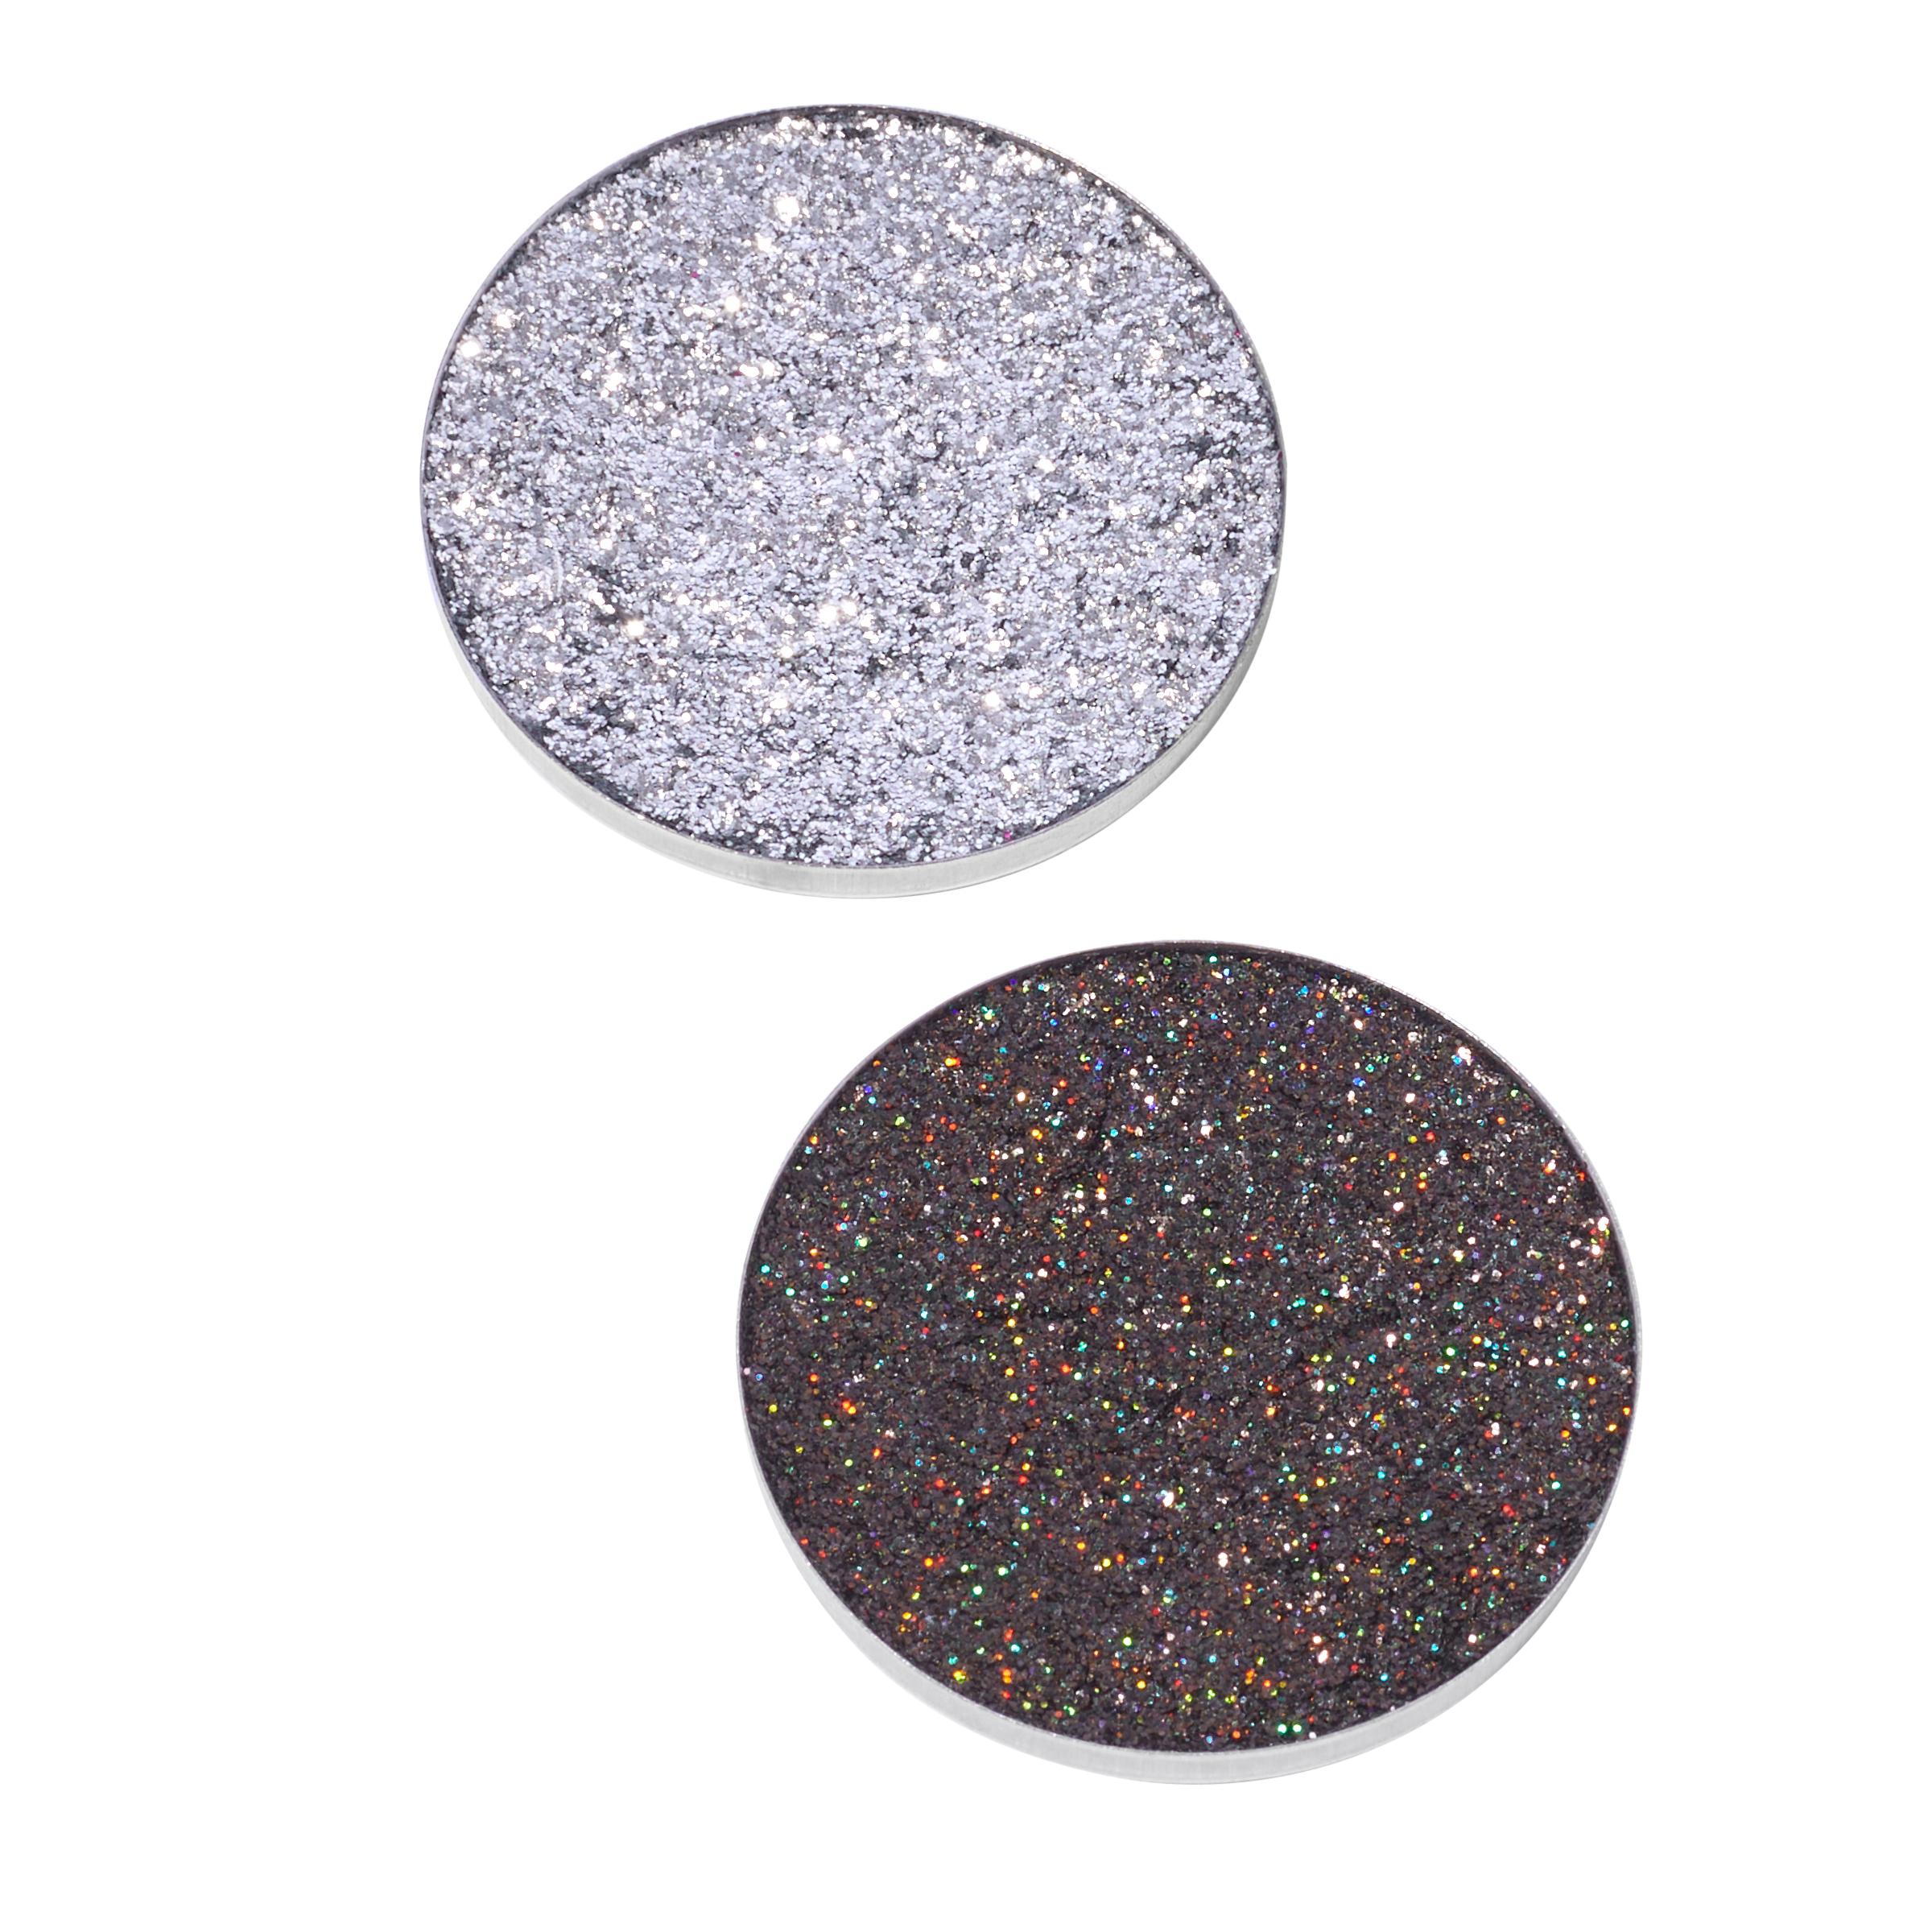 with love cosmetics pressed glitter duo silver sparks; black beauty